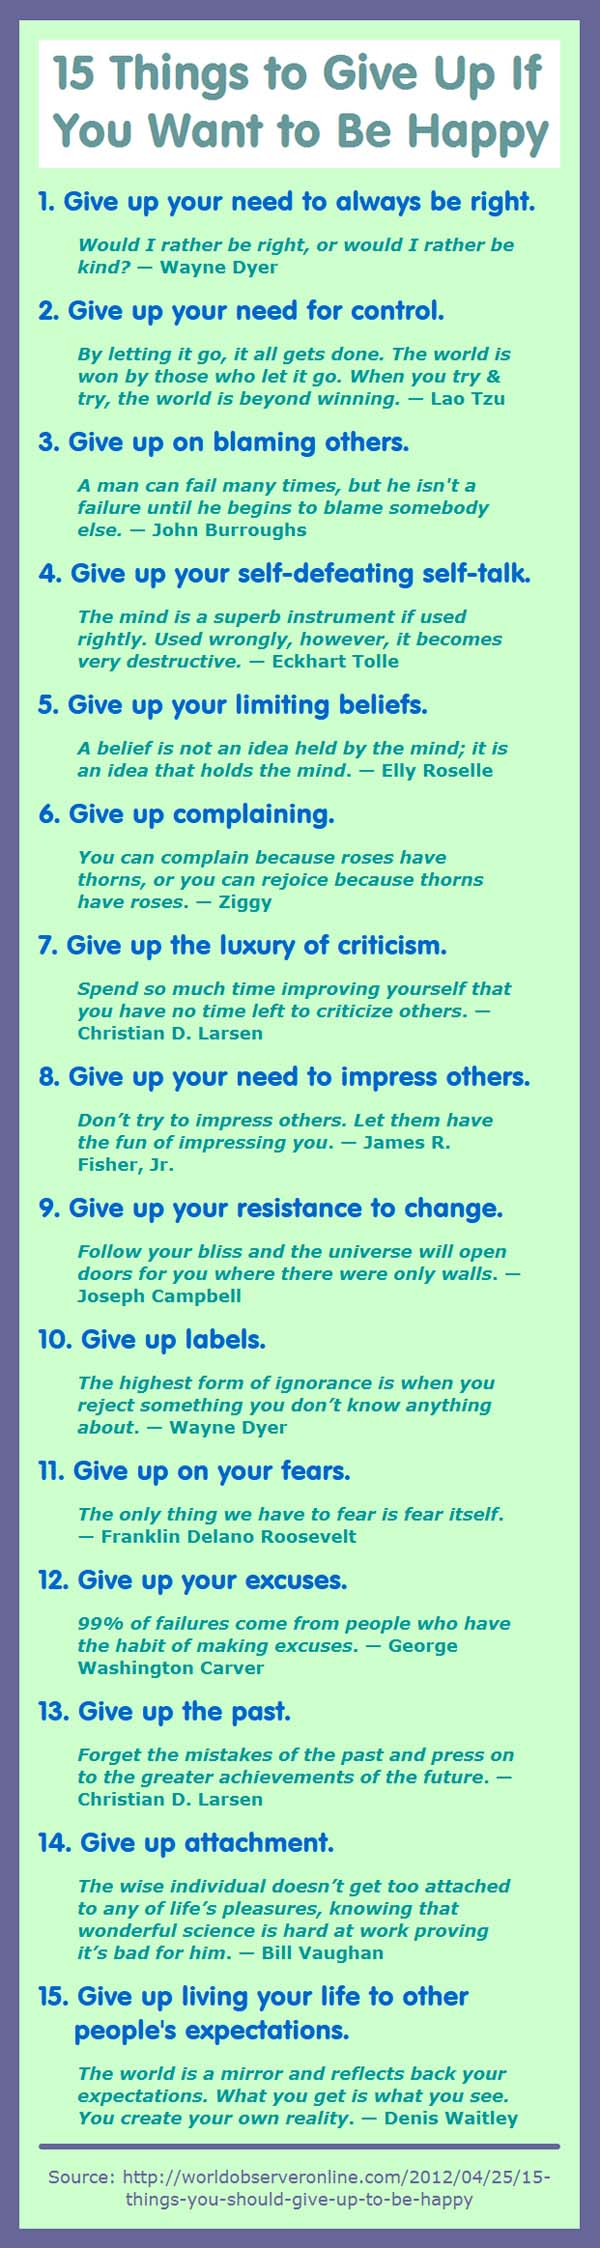 15 Things to Give Up If You Want to Be Happy